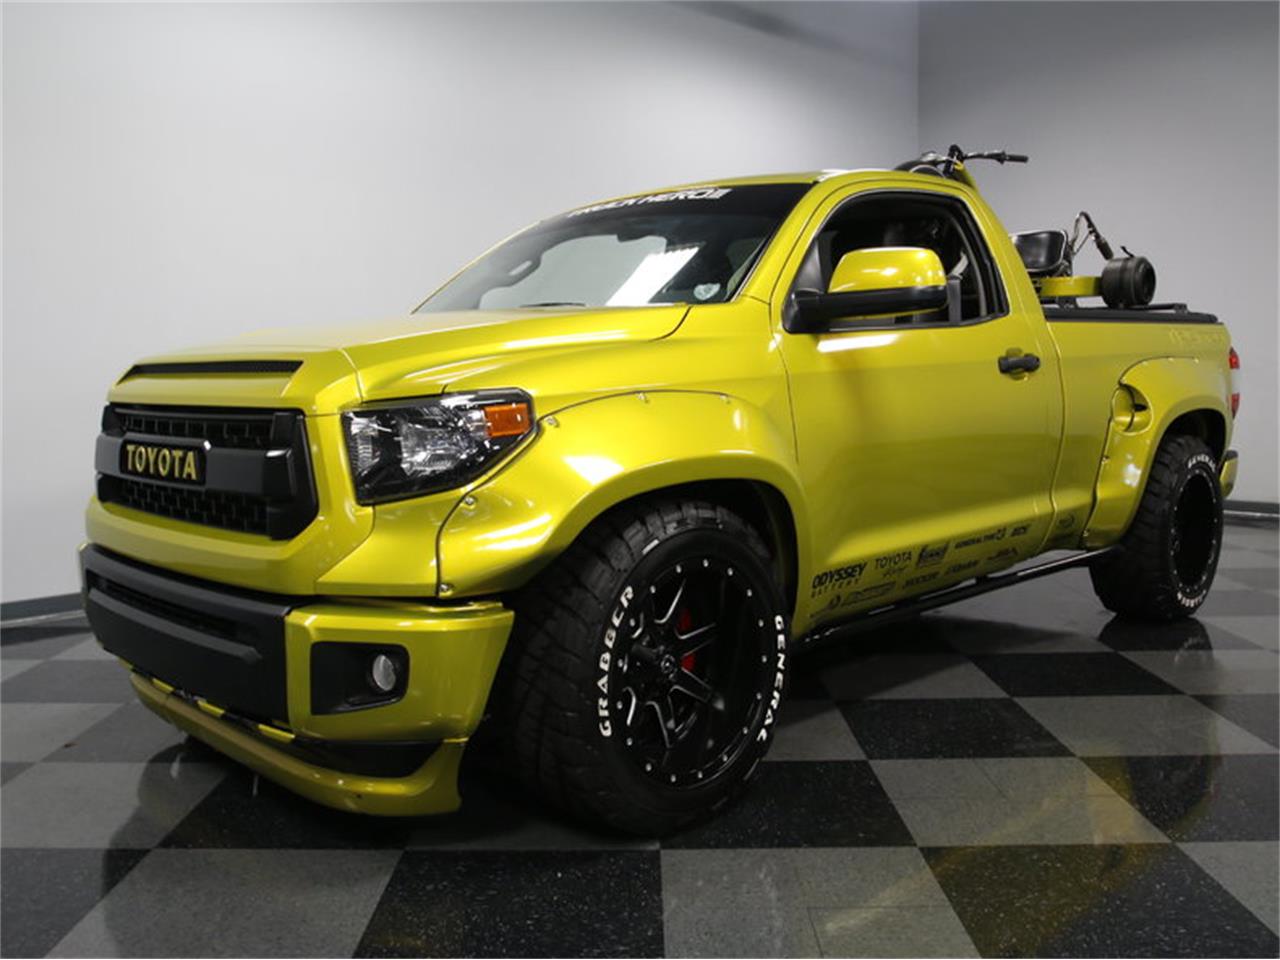 2008 Toyota Tundra TRD SUPERCHARGED for Sale | ClassicCars ...